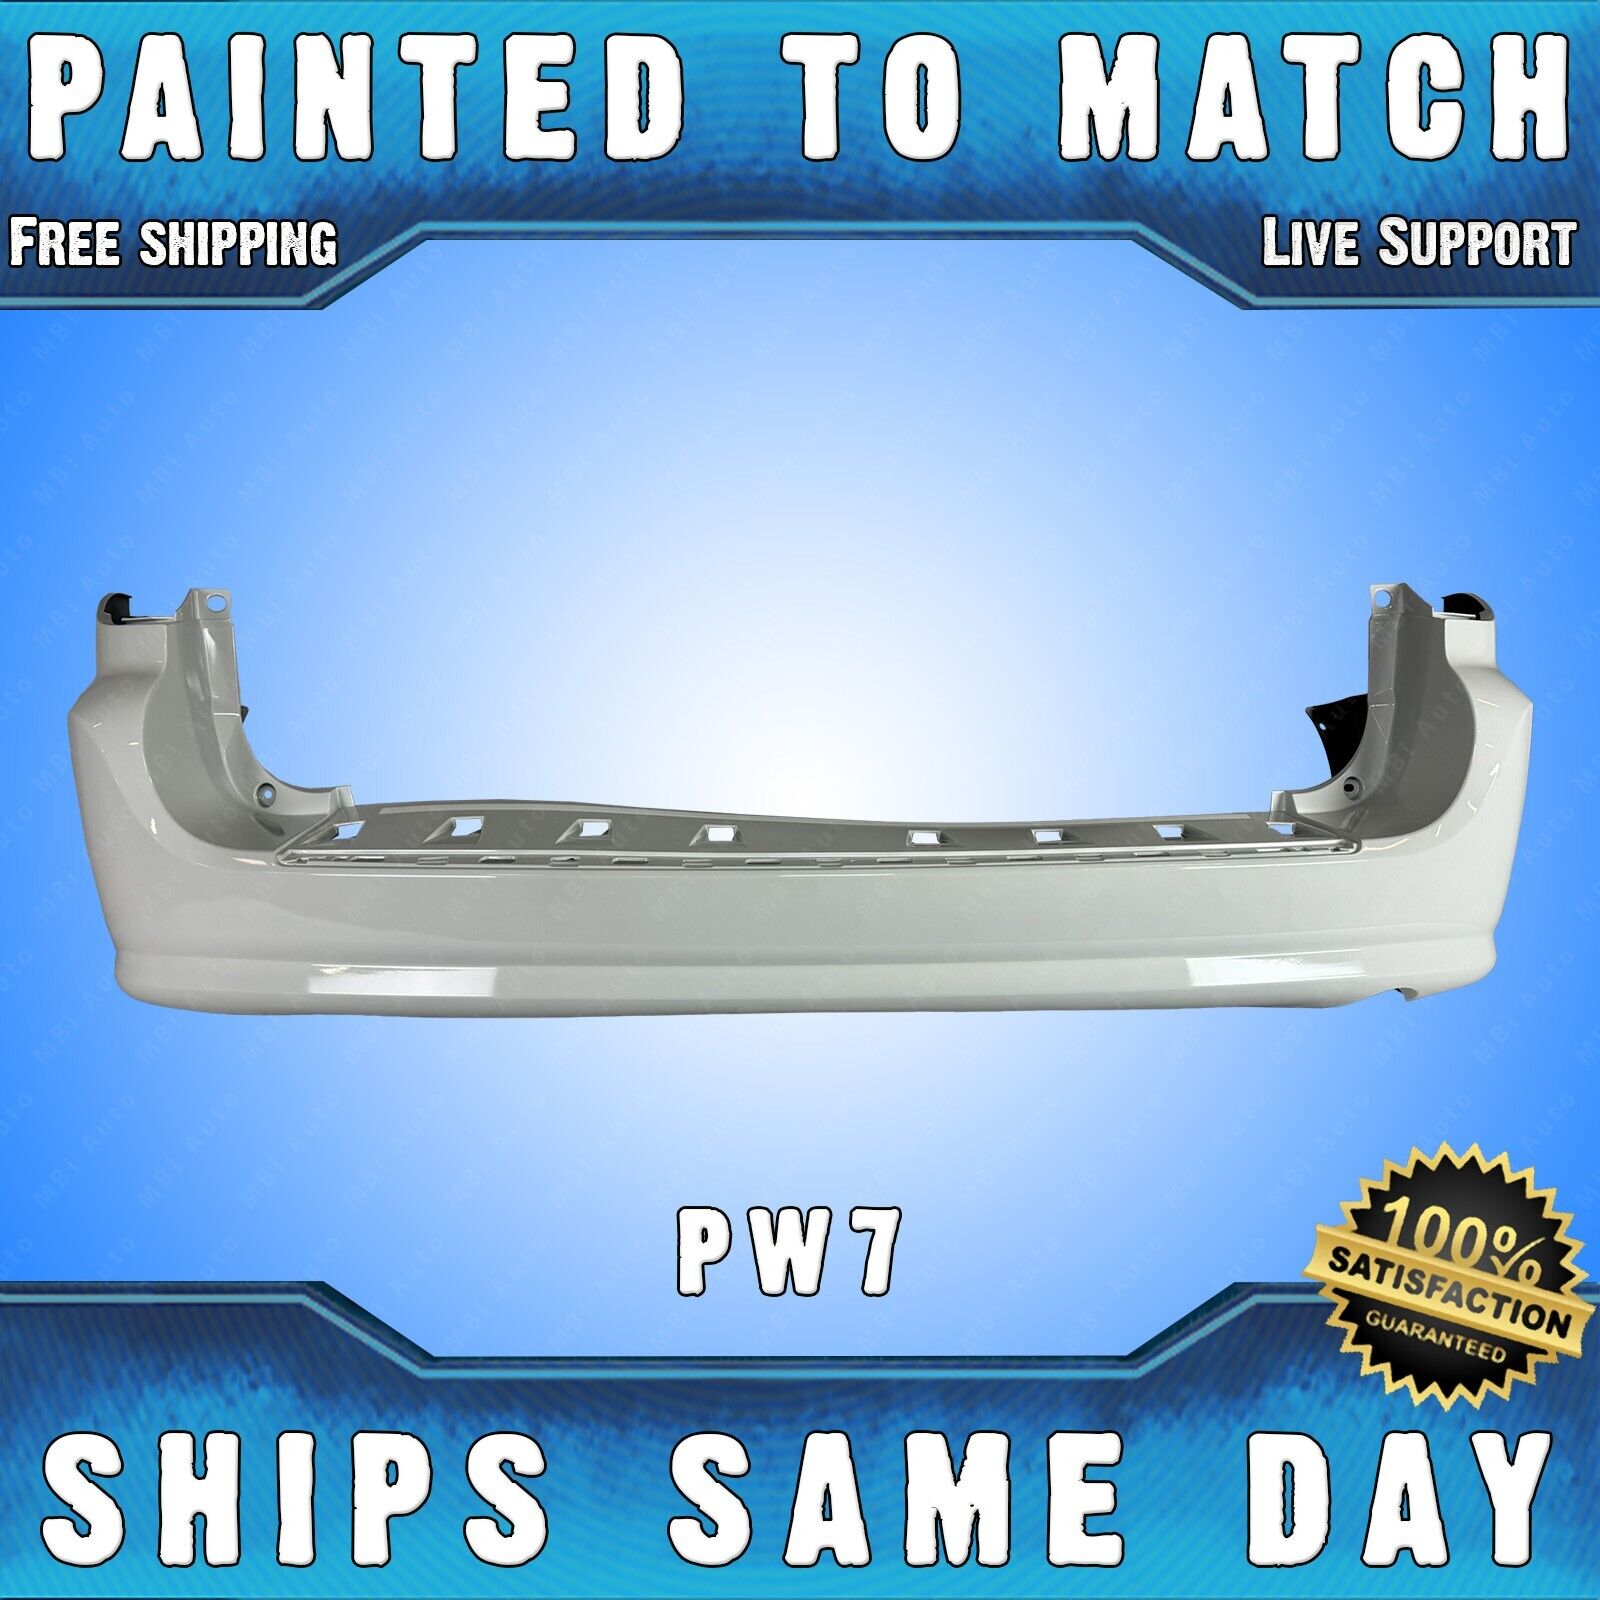 NEW Painted *PW7 White* Rear Bumper Cover for 2011-2020 Dodge Caravan 11-20